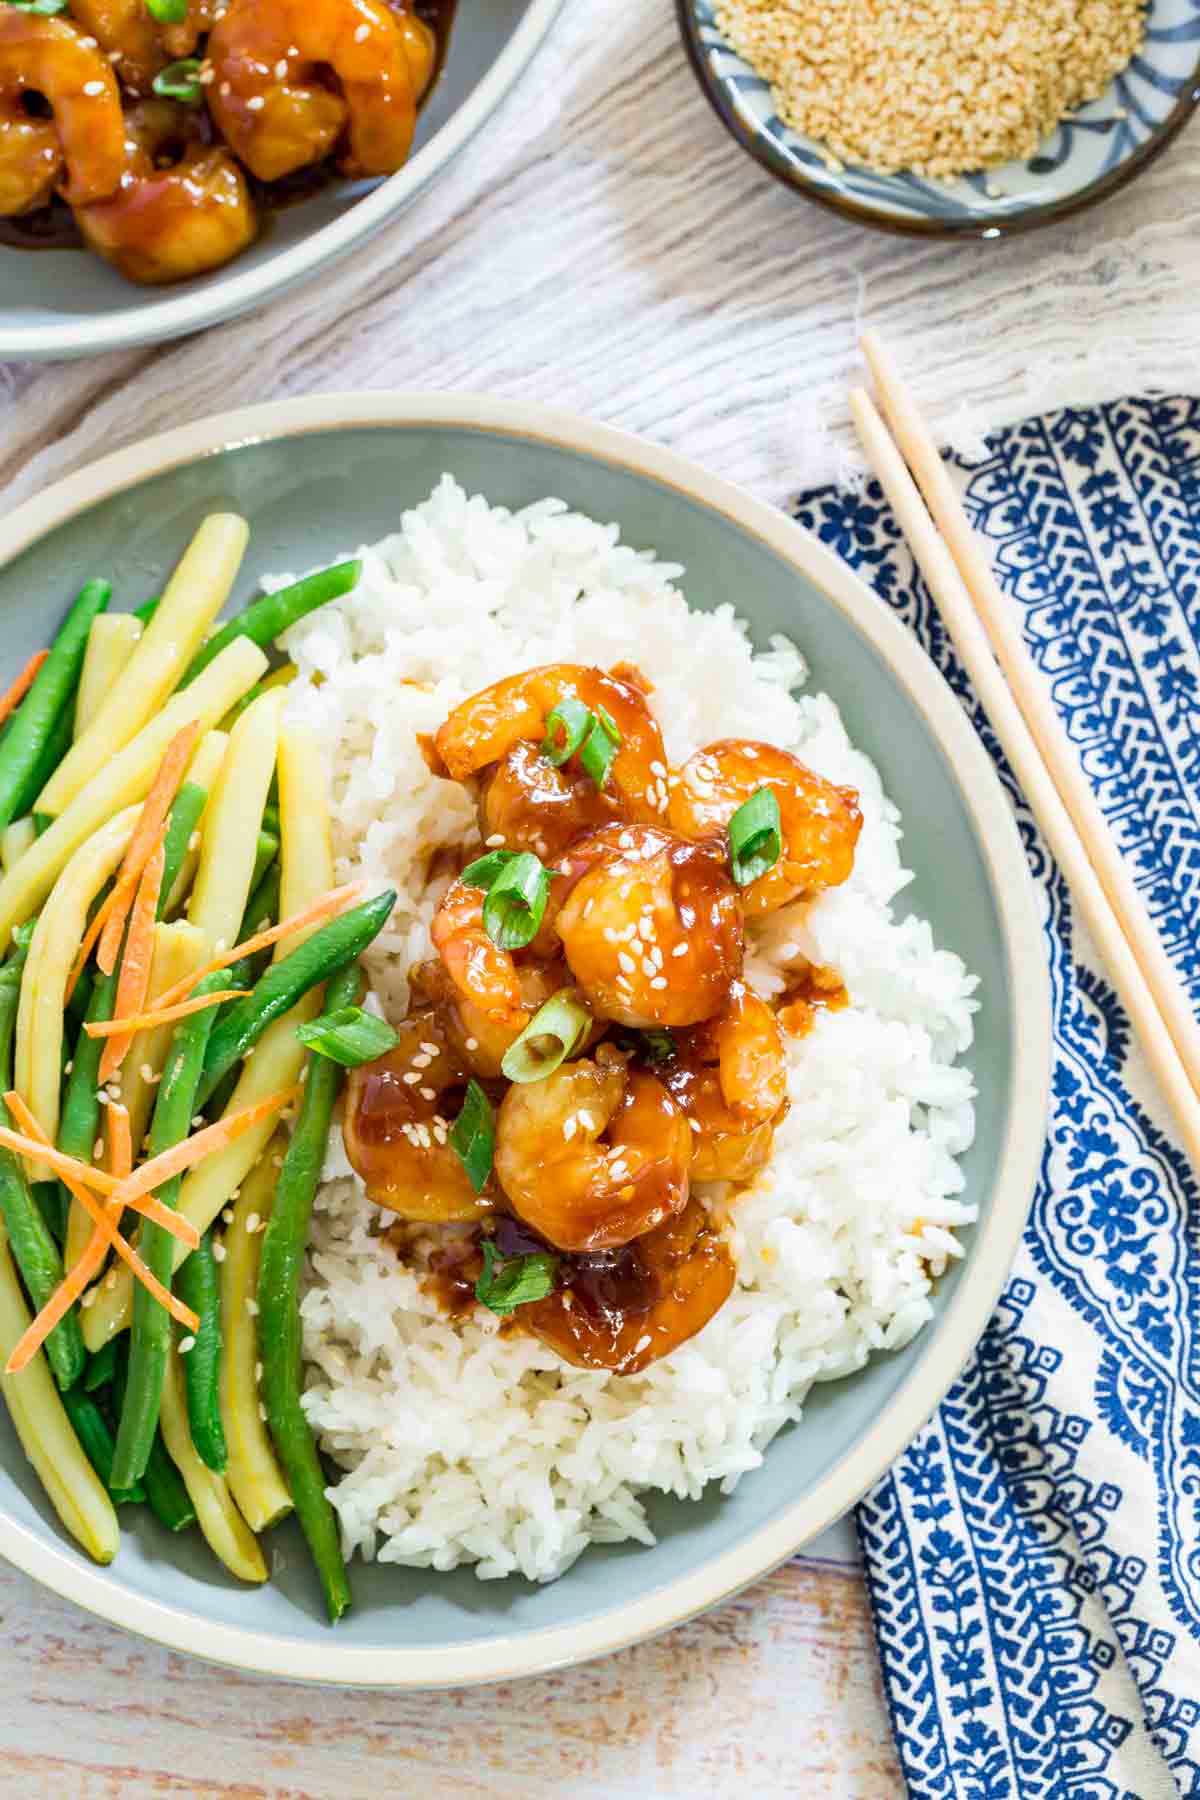 Teriyaki shrimp is shown on a bed of white rice on a plate.